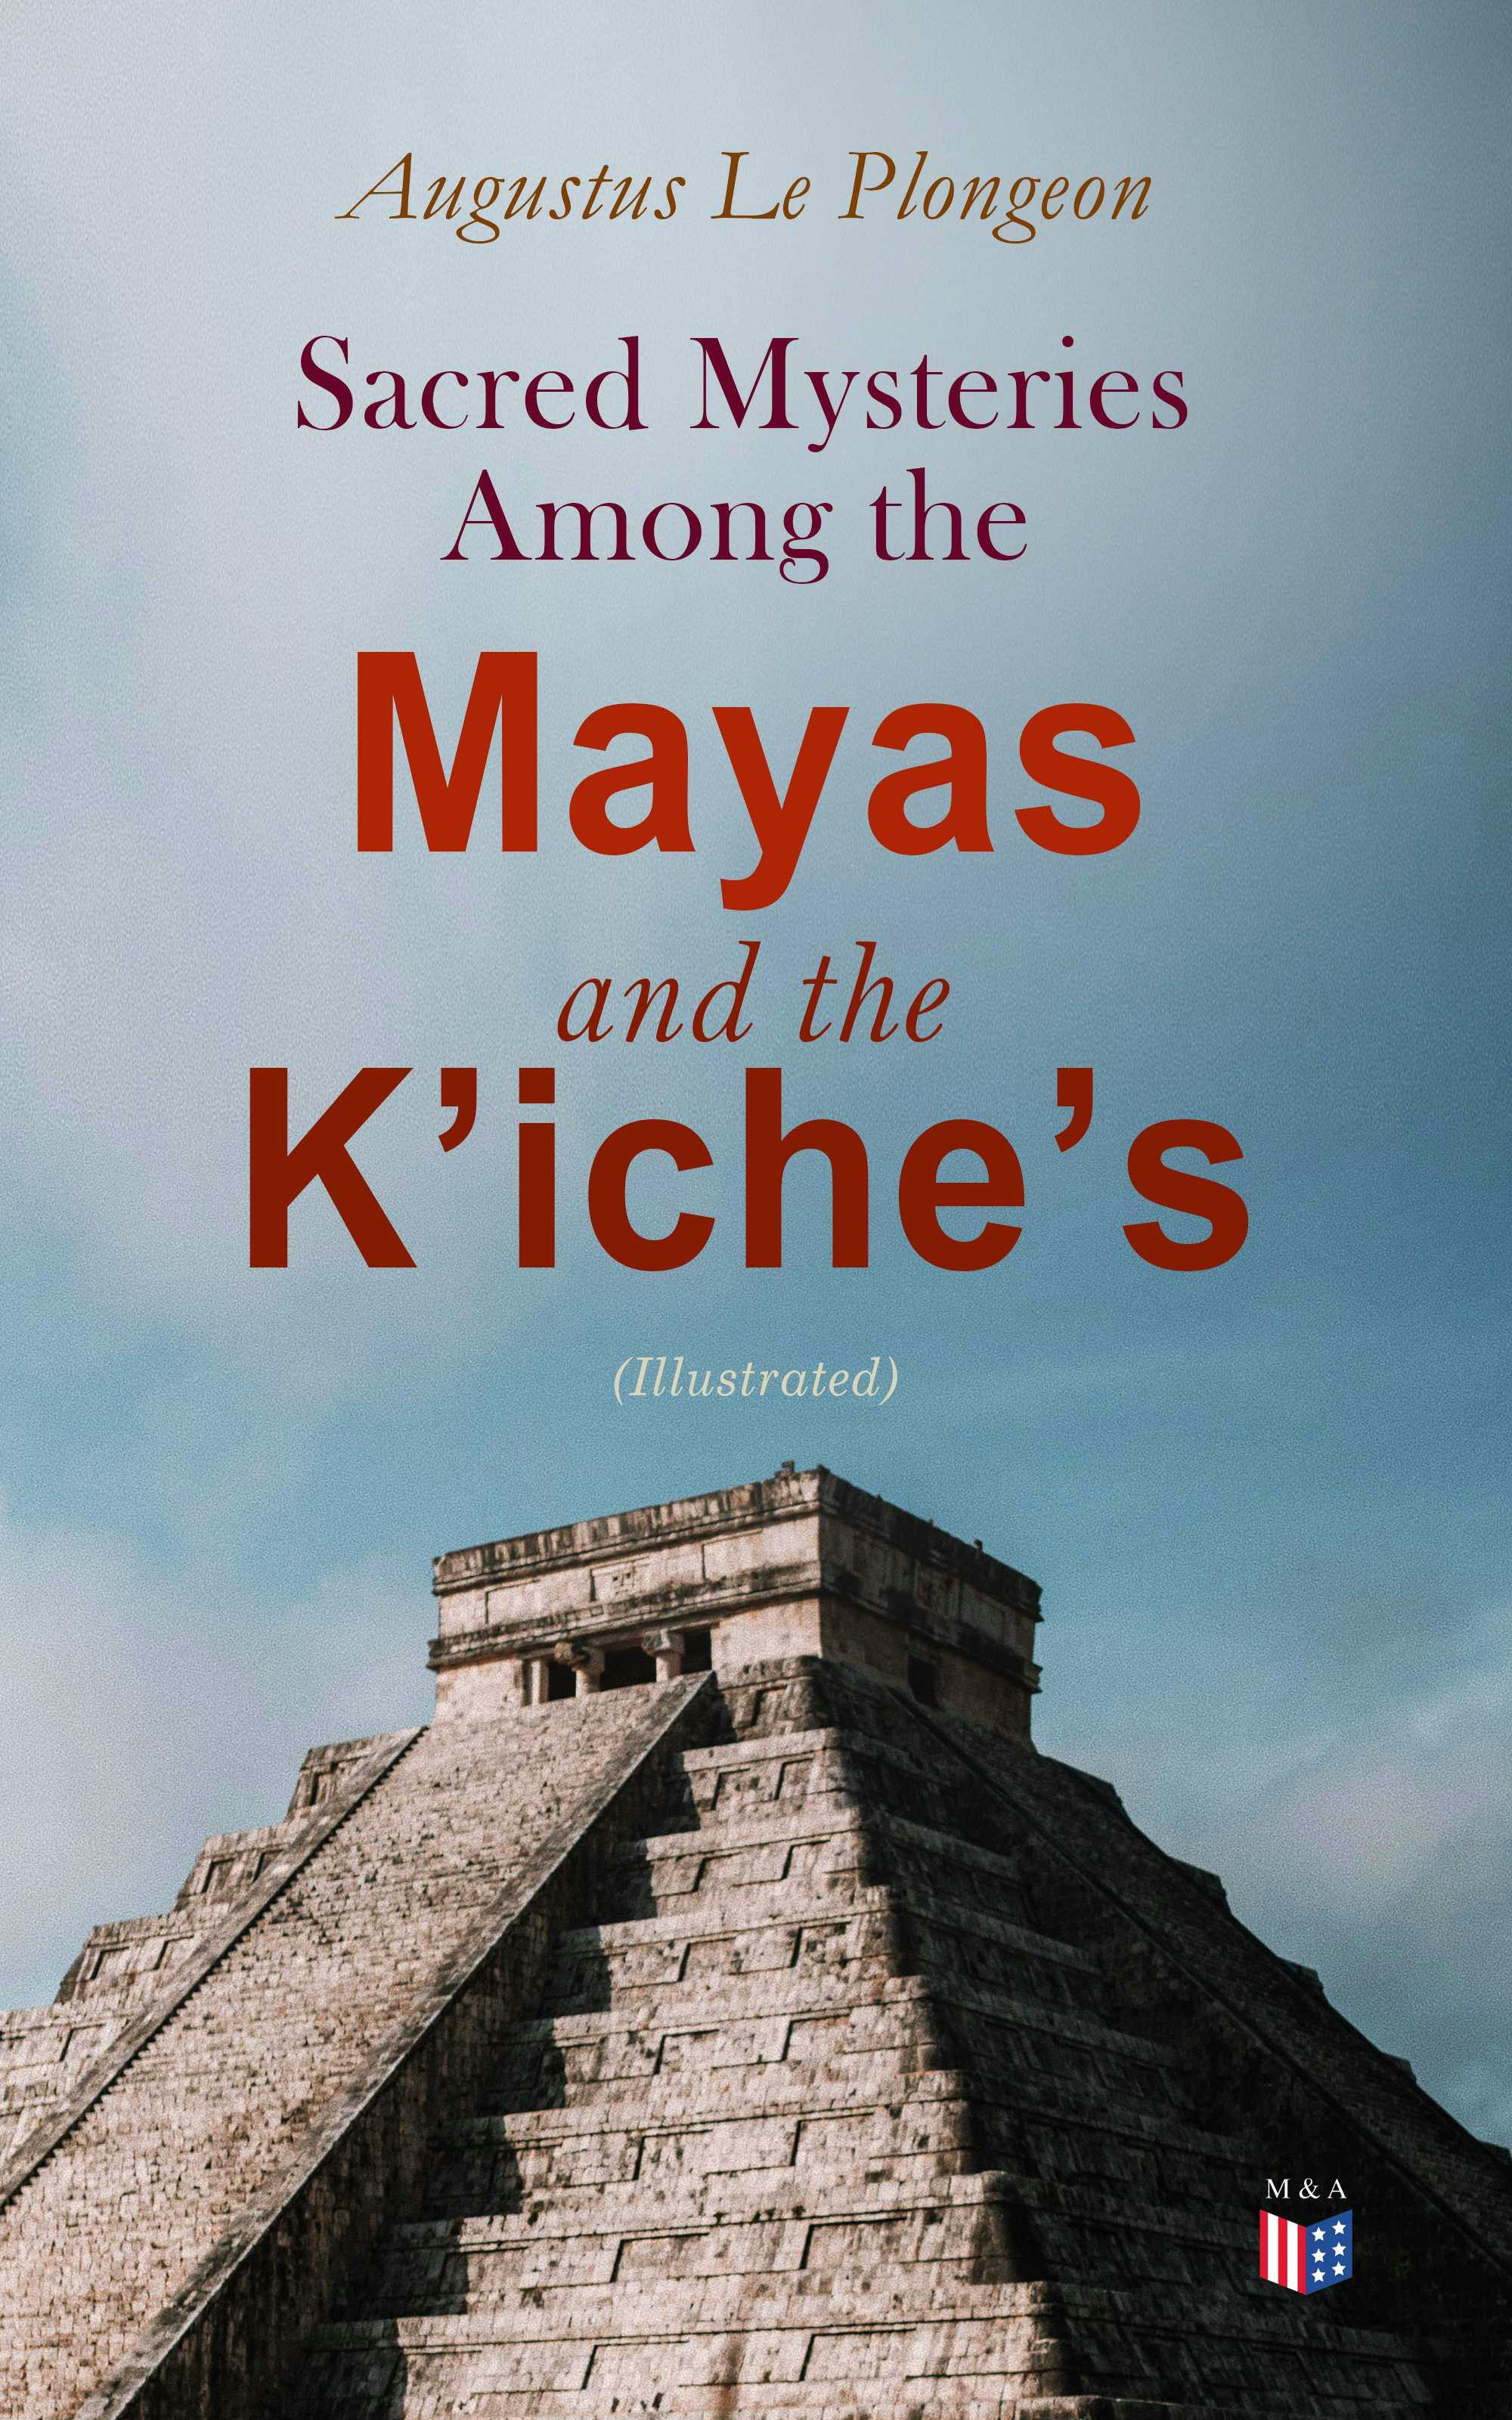 Sacred Mysteries Among the Mayas and the Kʼicheʼs (Illustrated): Their Relation to the Sacred Mysteries of Egypt, Greece, Chaldea and India - Augustus Le Plongeon